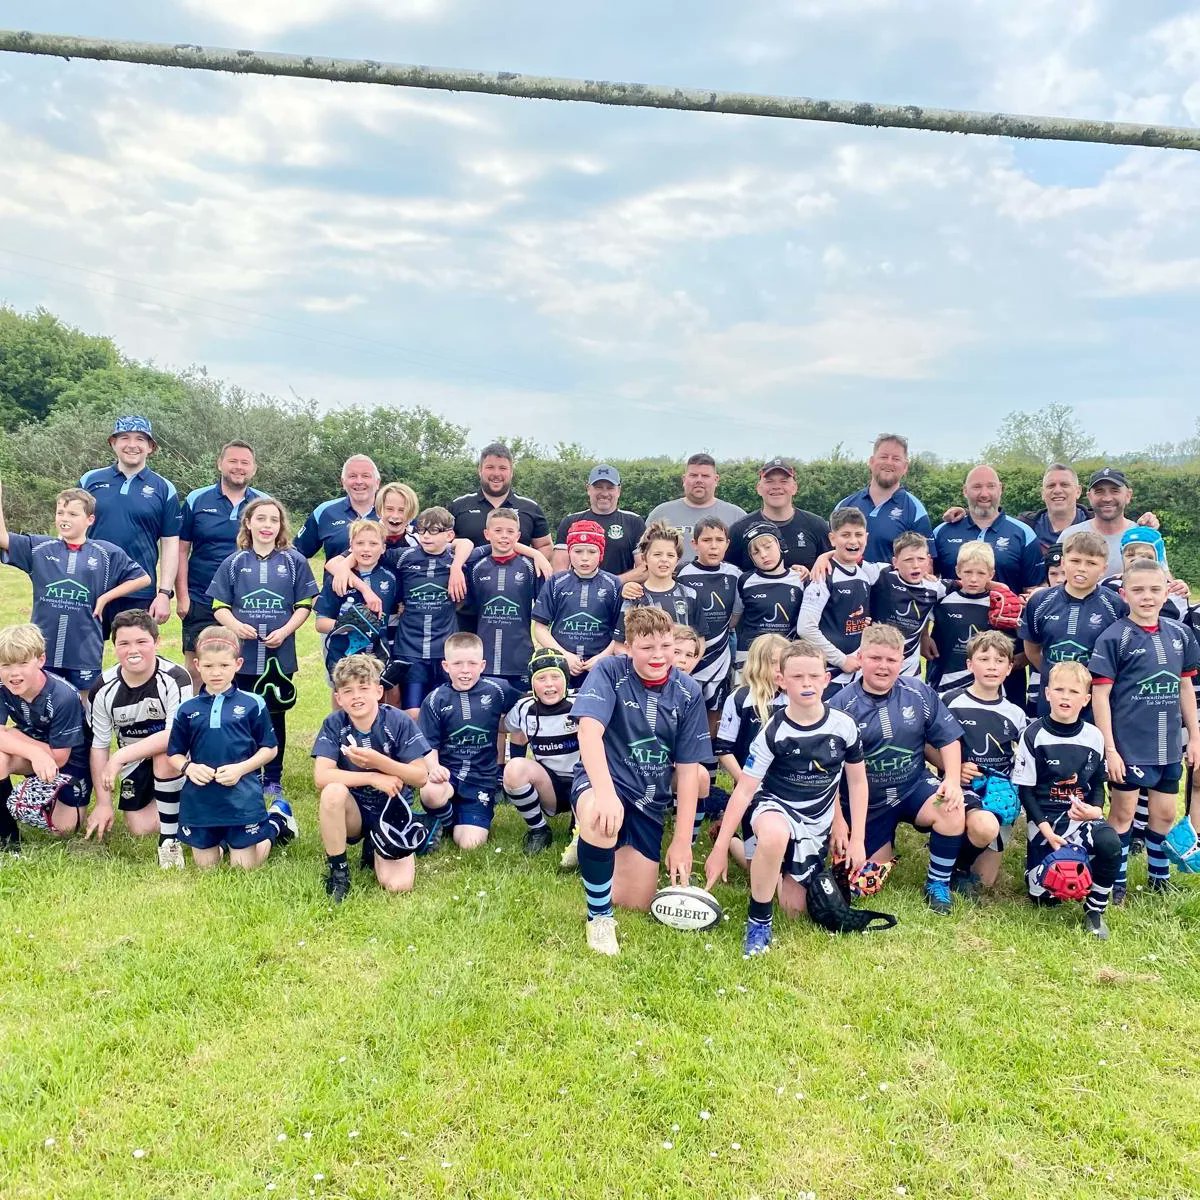 Great end to the season today as the u7s played some fantastic rugby against Mumbles. The U10s (with a few u9s) had a great performance against touring side Caldicot. The U12s finished their season with another superb performance against Penclawdd! #UppaSeahorse